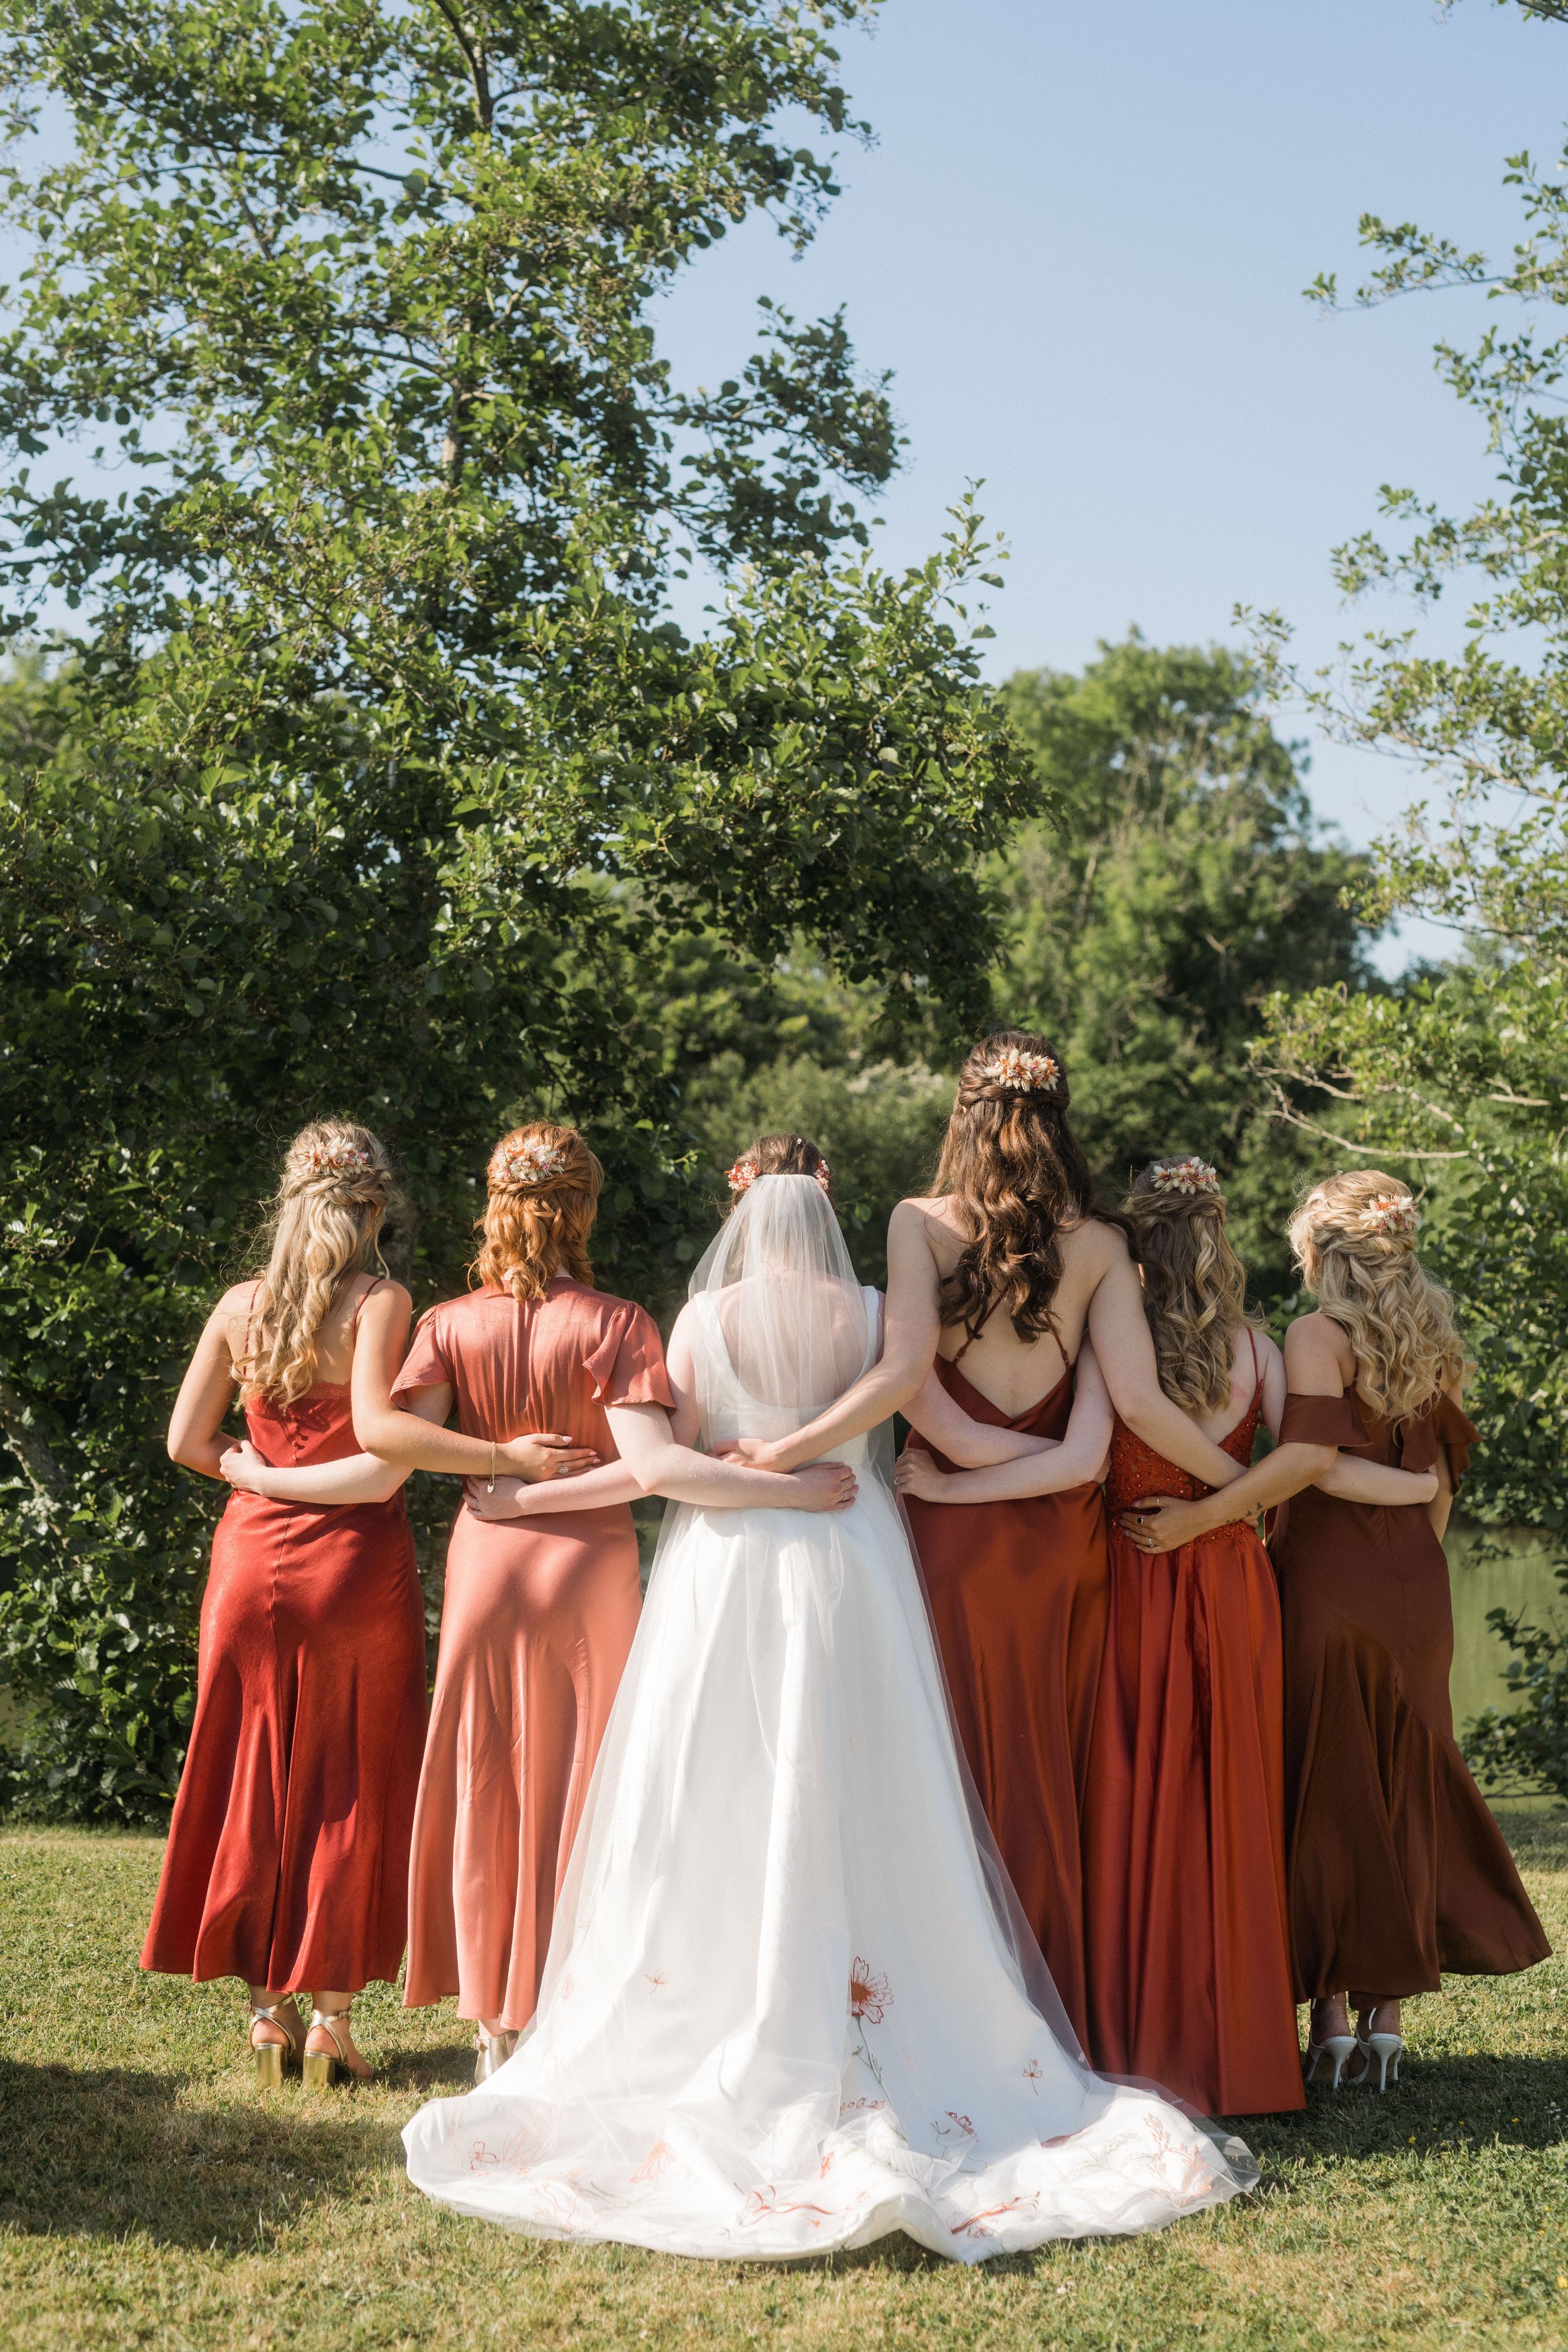  Bride with her bridesmaids facing away showing back of dresses and veil 